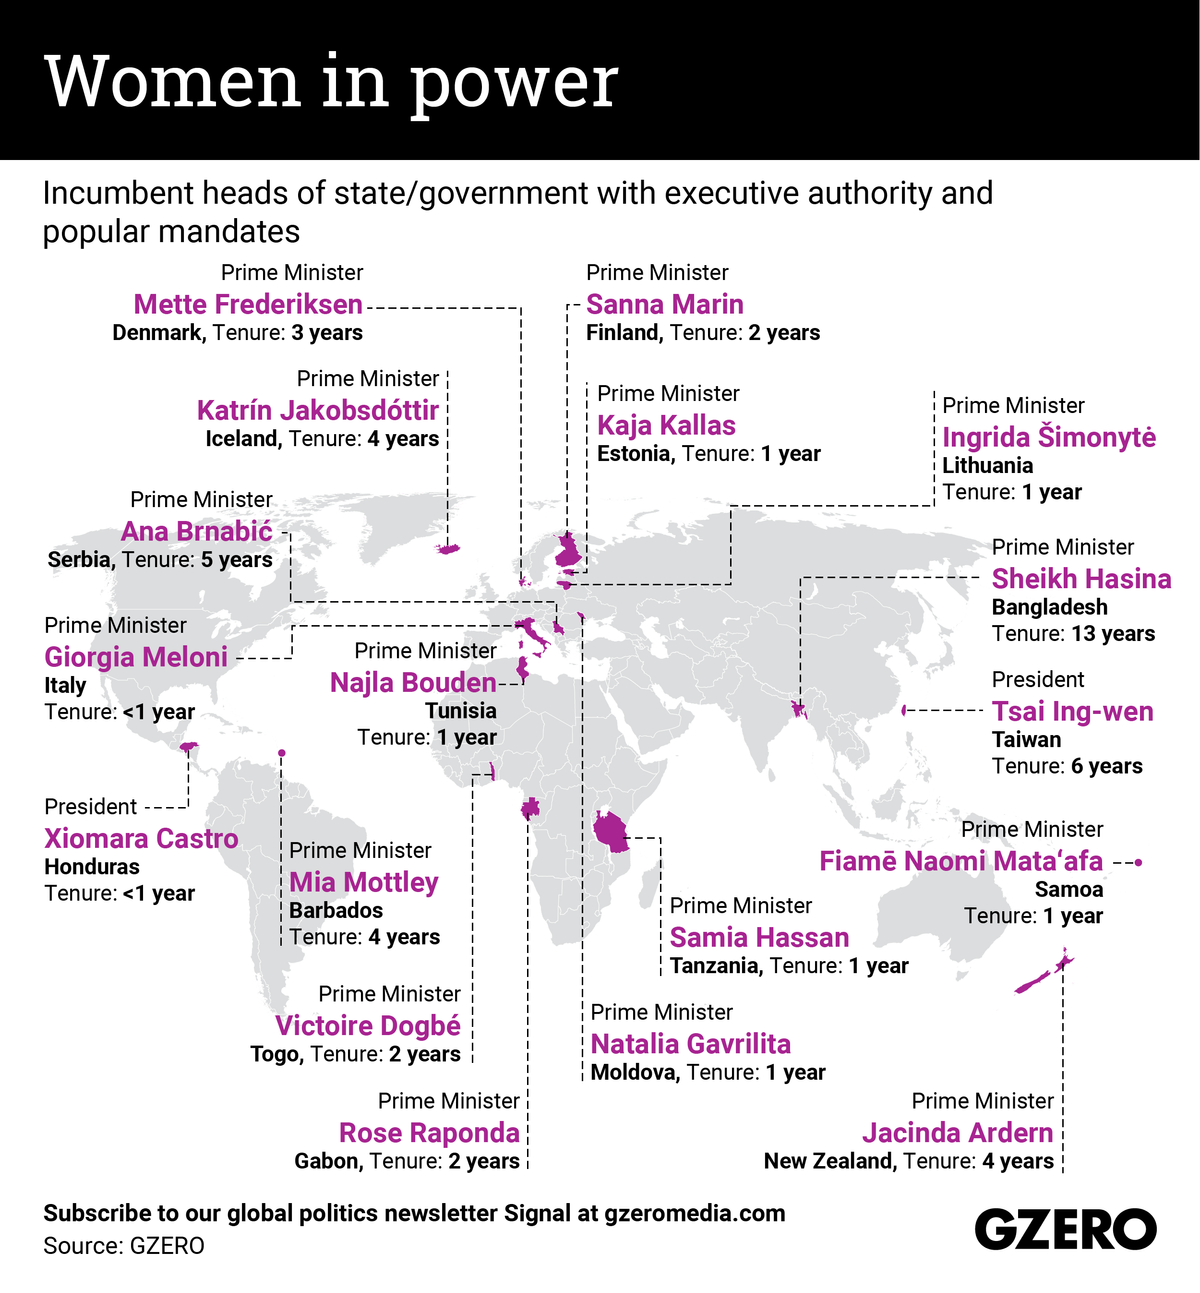 We list the world’s 18 female incumbents with executive authority and popular mandates to serve.